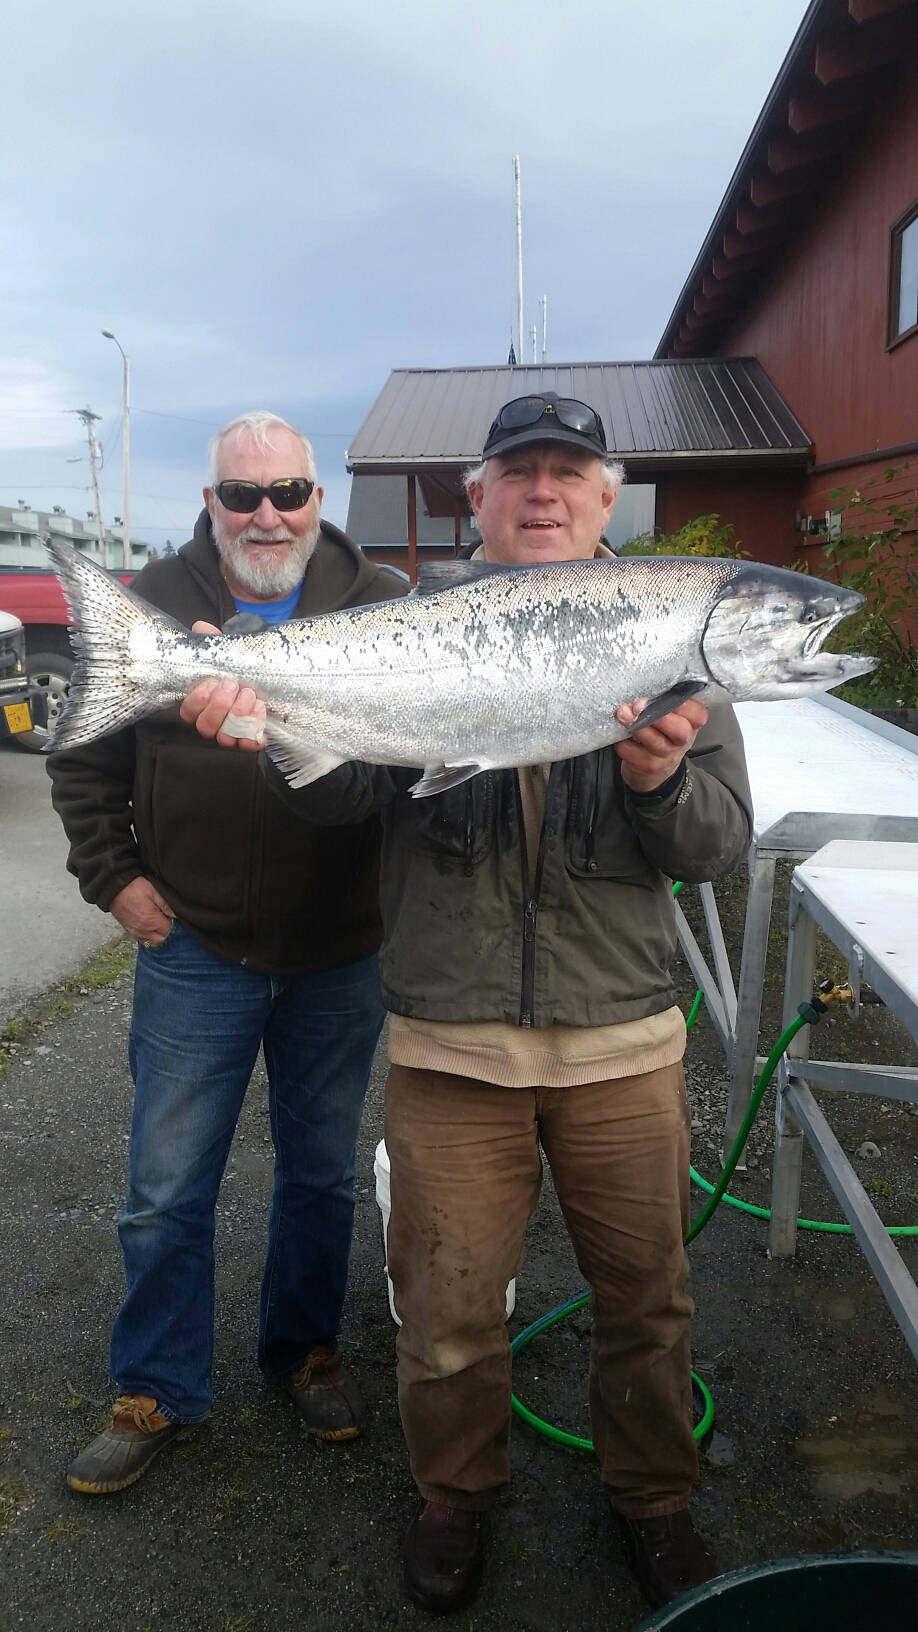 Ed Scribner holds up his 24.60 pound king salmon in the 2017 Homer Elks #2127 Winter King Salmon Derby. Scribner took first place fishing on the F/V Sea Wolf. Behind him is Don Fritz from Soldotna. Rough seas didn’t keep anglers from braving Kachemak Bay for a chance to win the Elks Lodge derby, held Oct. 7-8. Ron Johnson took second with a 22.20-pound king on the F/V Oly John and Patrick Hankins was third with a 20.40-pound king on the F/V Sound Escape. Bethany Casey had a 20.30-pound king on the F/V Misty, winning first place for the lady angler division. With only 175 anglers, including women, 84 fish caught and 793.45 weighed, this year’s derby was down from 2016, when 204 anglers caught 372 fish for a total weight of 3,350 pounds. Proceeds from the $100 per angler entry fees help support Elks youth, veterans and community charity programs. (Photo provided)